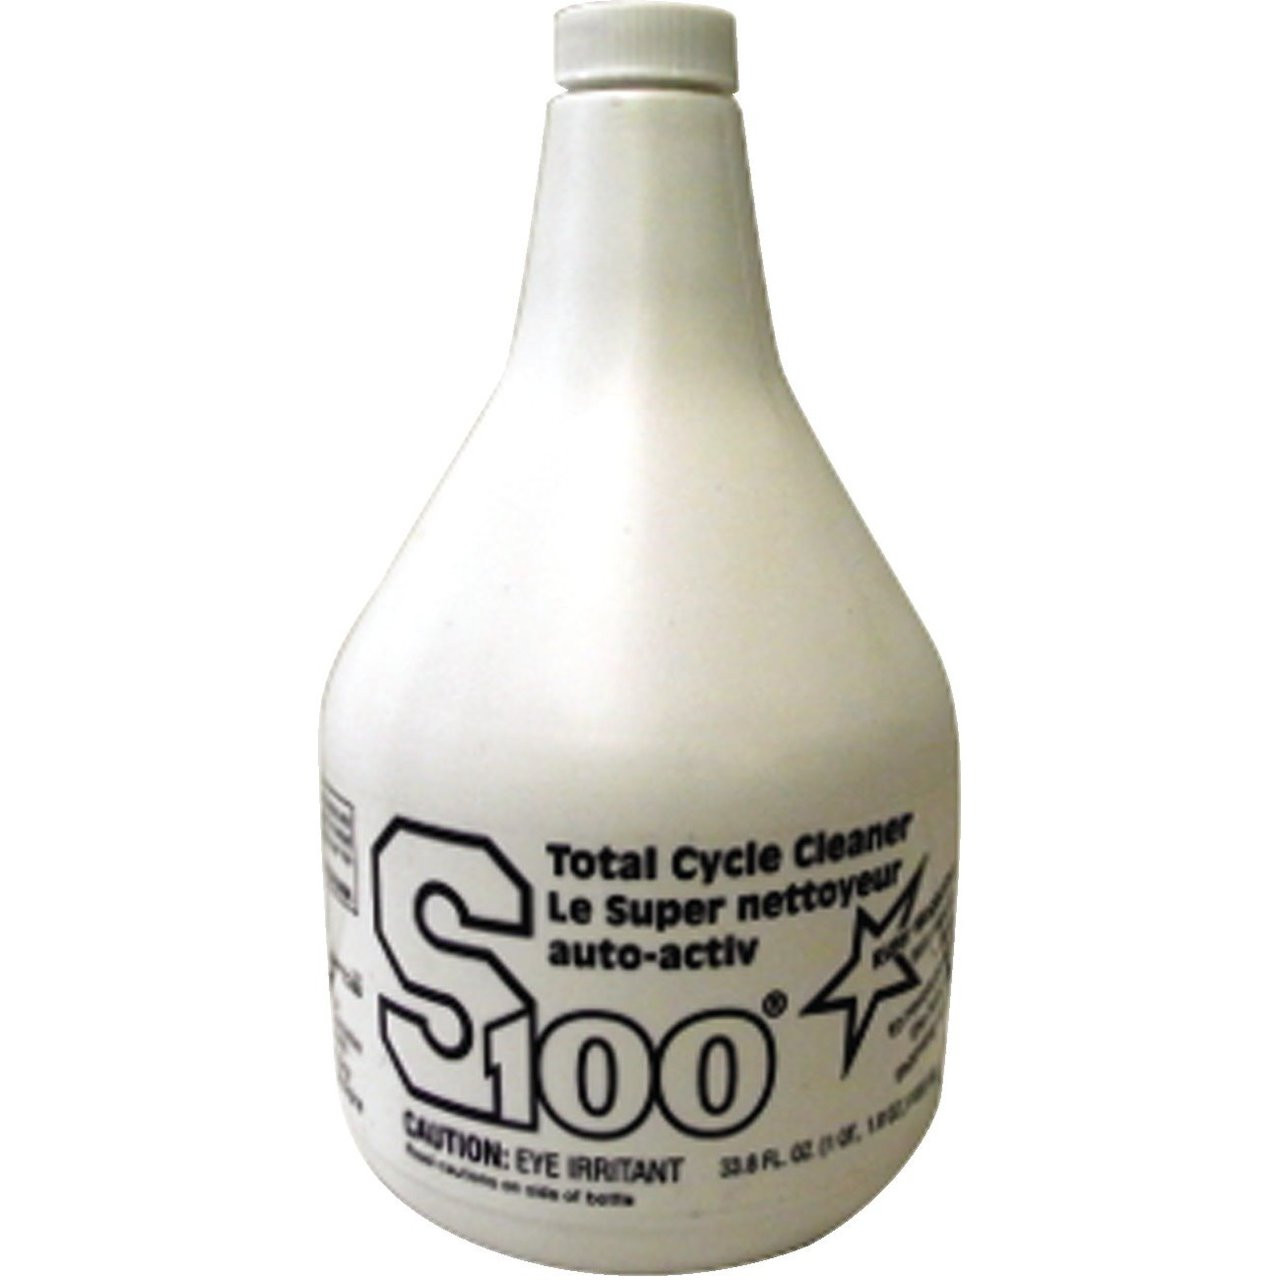 S100 Total Cycle Cleaner 1 Liter Refill